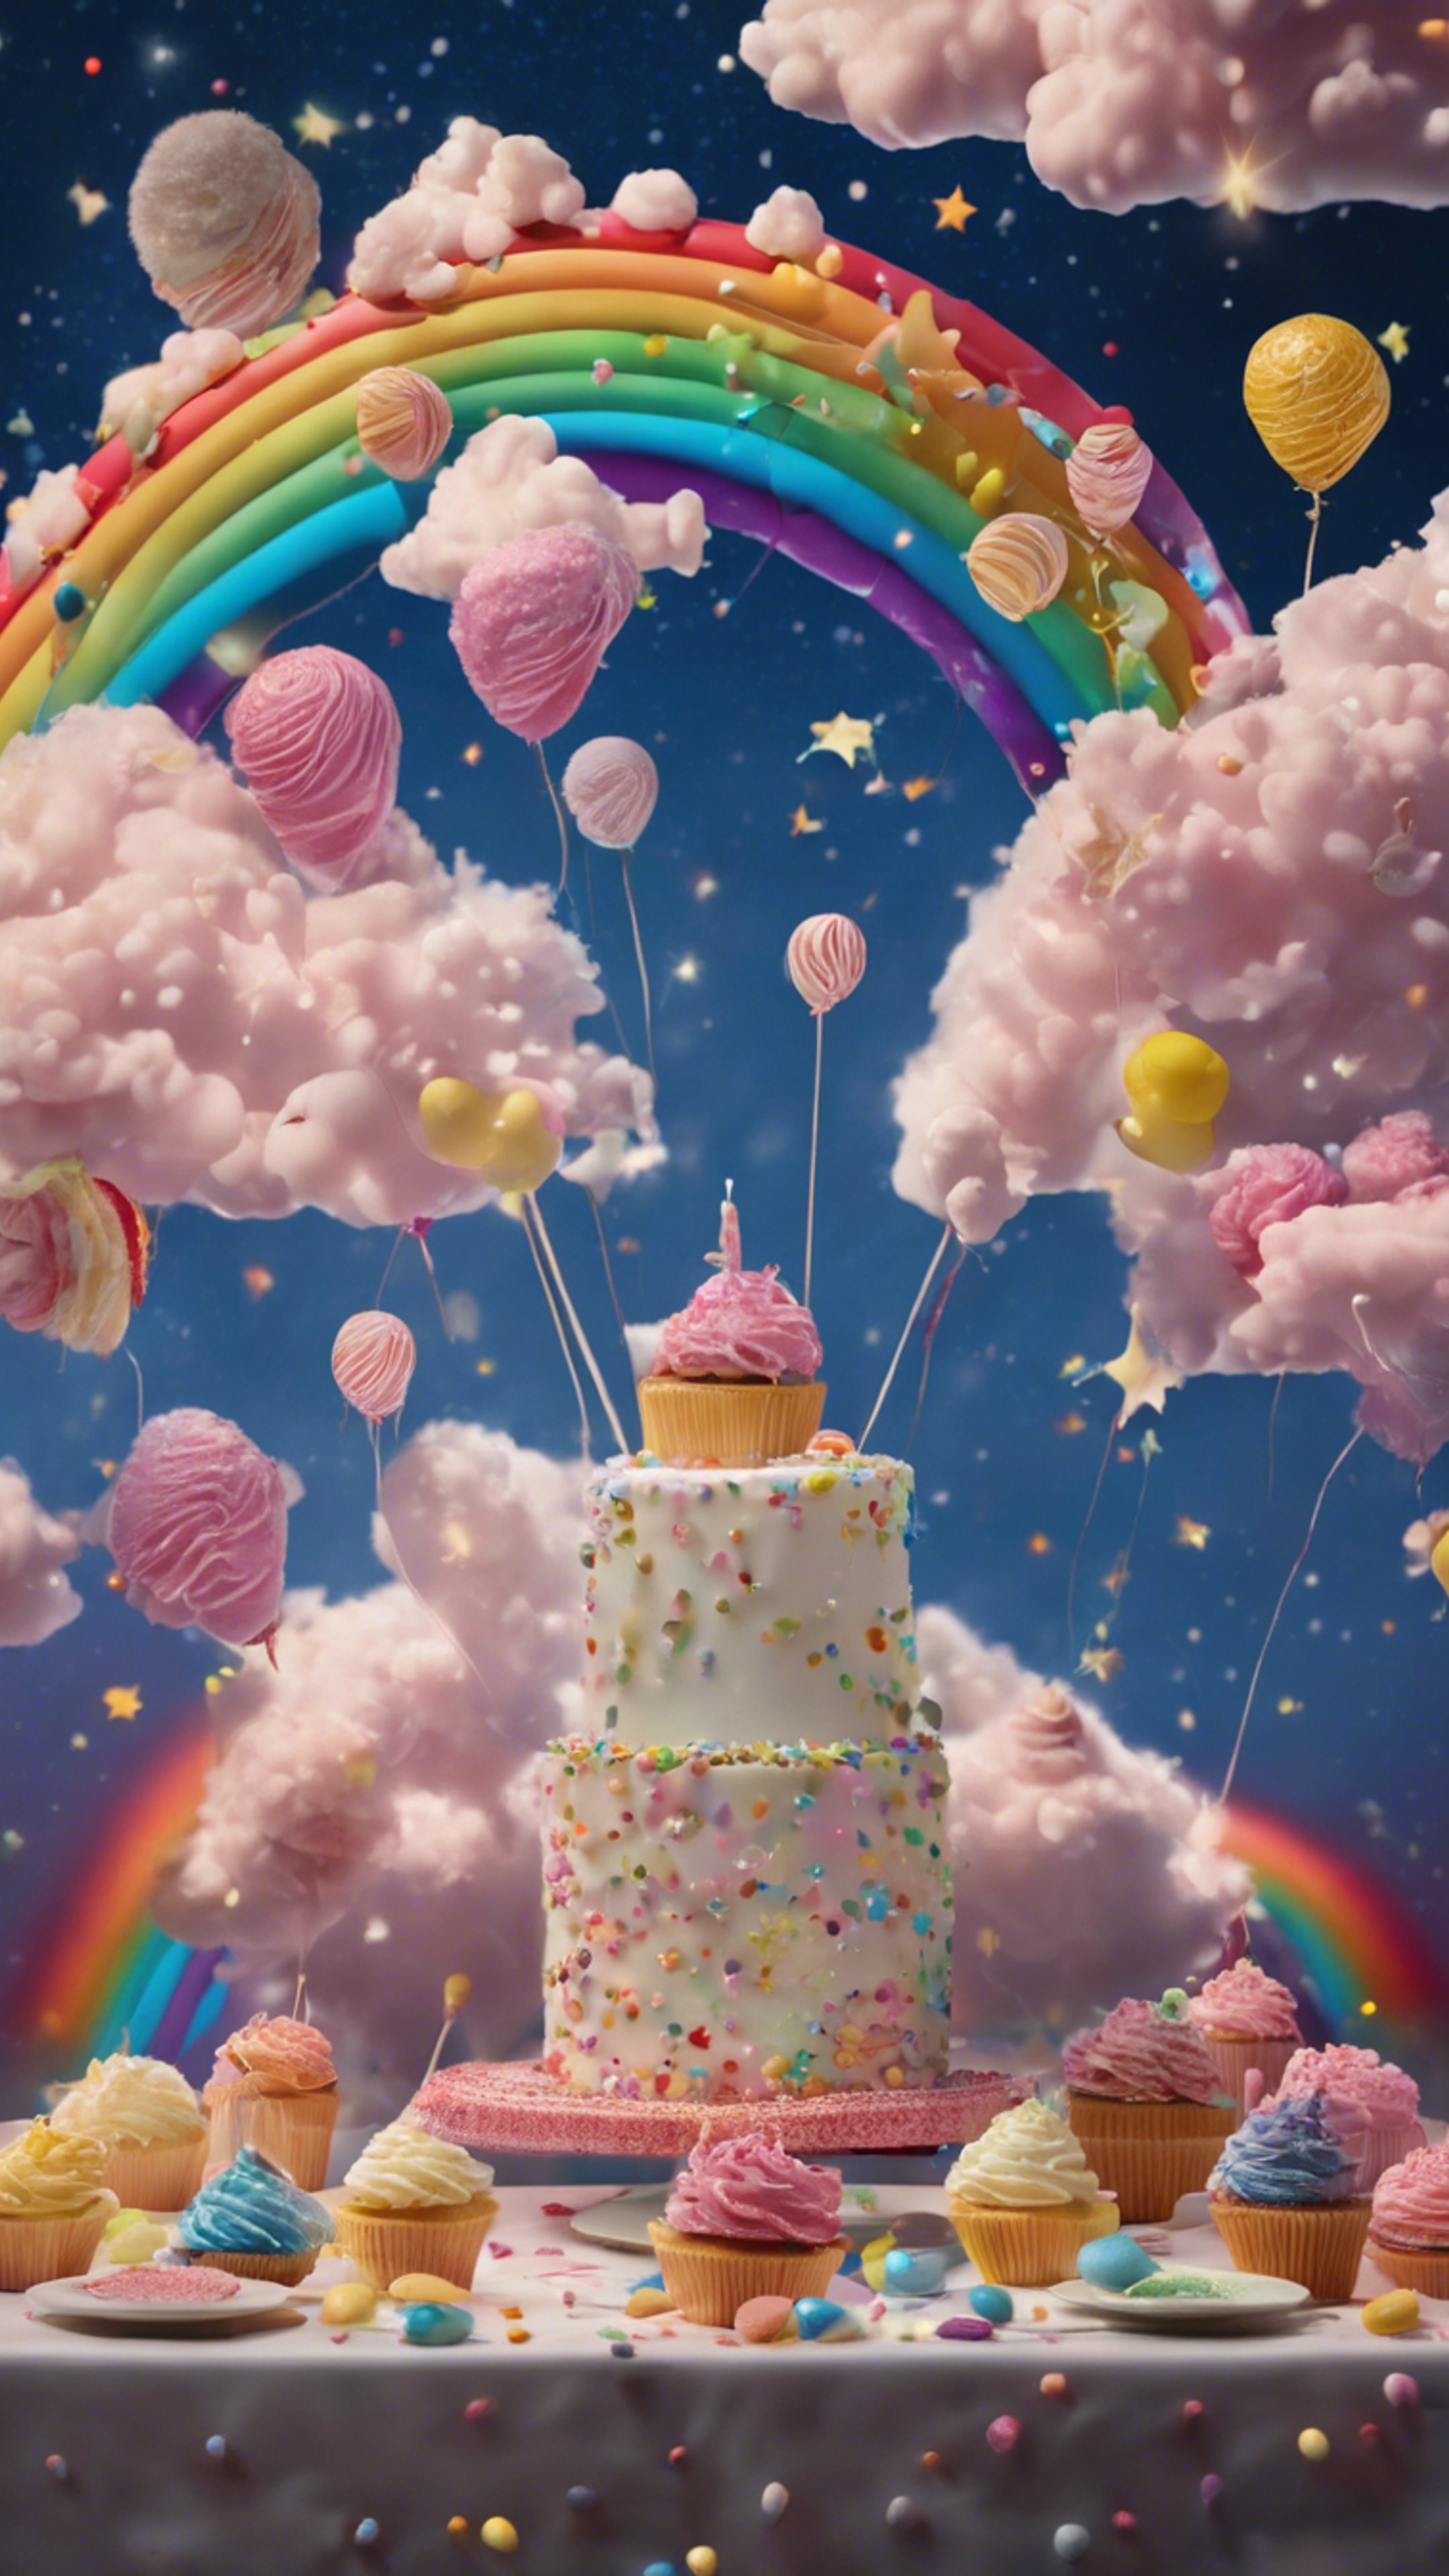 Surreal representation of a birthday party with floating cakes, candies amid fluffy clouds and rainbows discordantly juxtaposed against a starry night sky. Tapeet[7f18c2fd7760424e83fc]